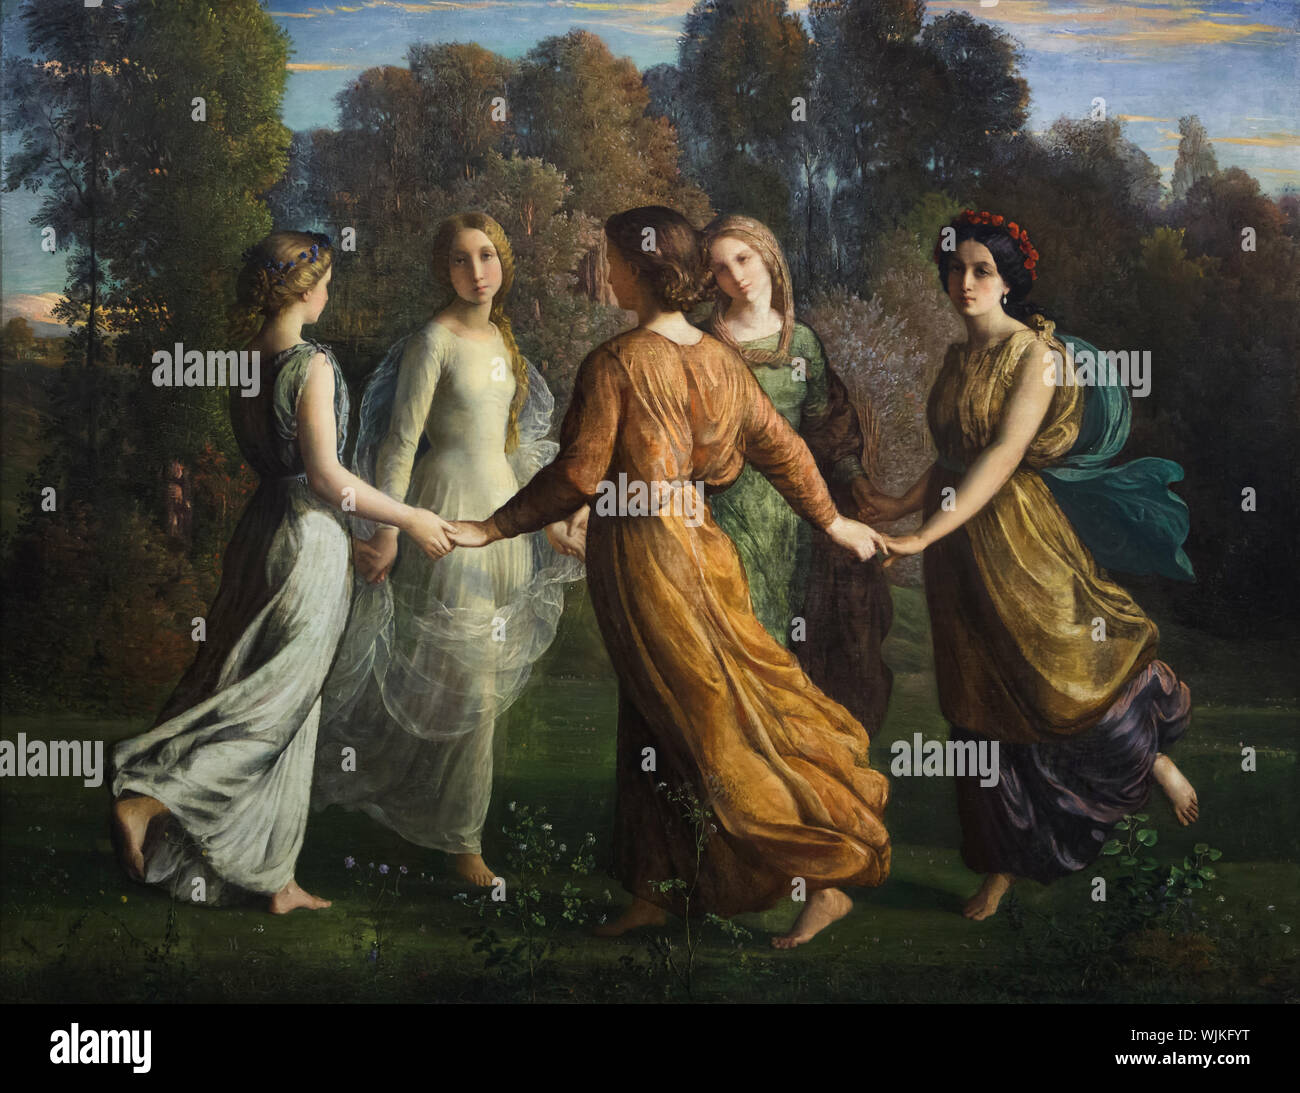 Painting 'Rays of the Sun' ('Rayons de soleil') from the cycles 'The Poem of the Soul' (1835-1855) by French symbolist painter Louis Janmot on display in the Museum of Fine Arts (Musée des Beaux-Arts de Lyon) in Lyon, France. Stock Photo